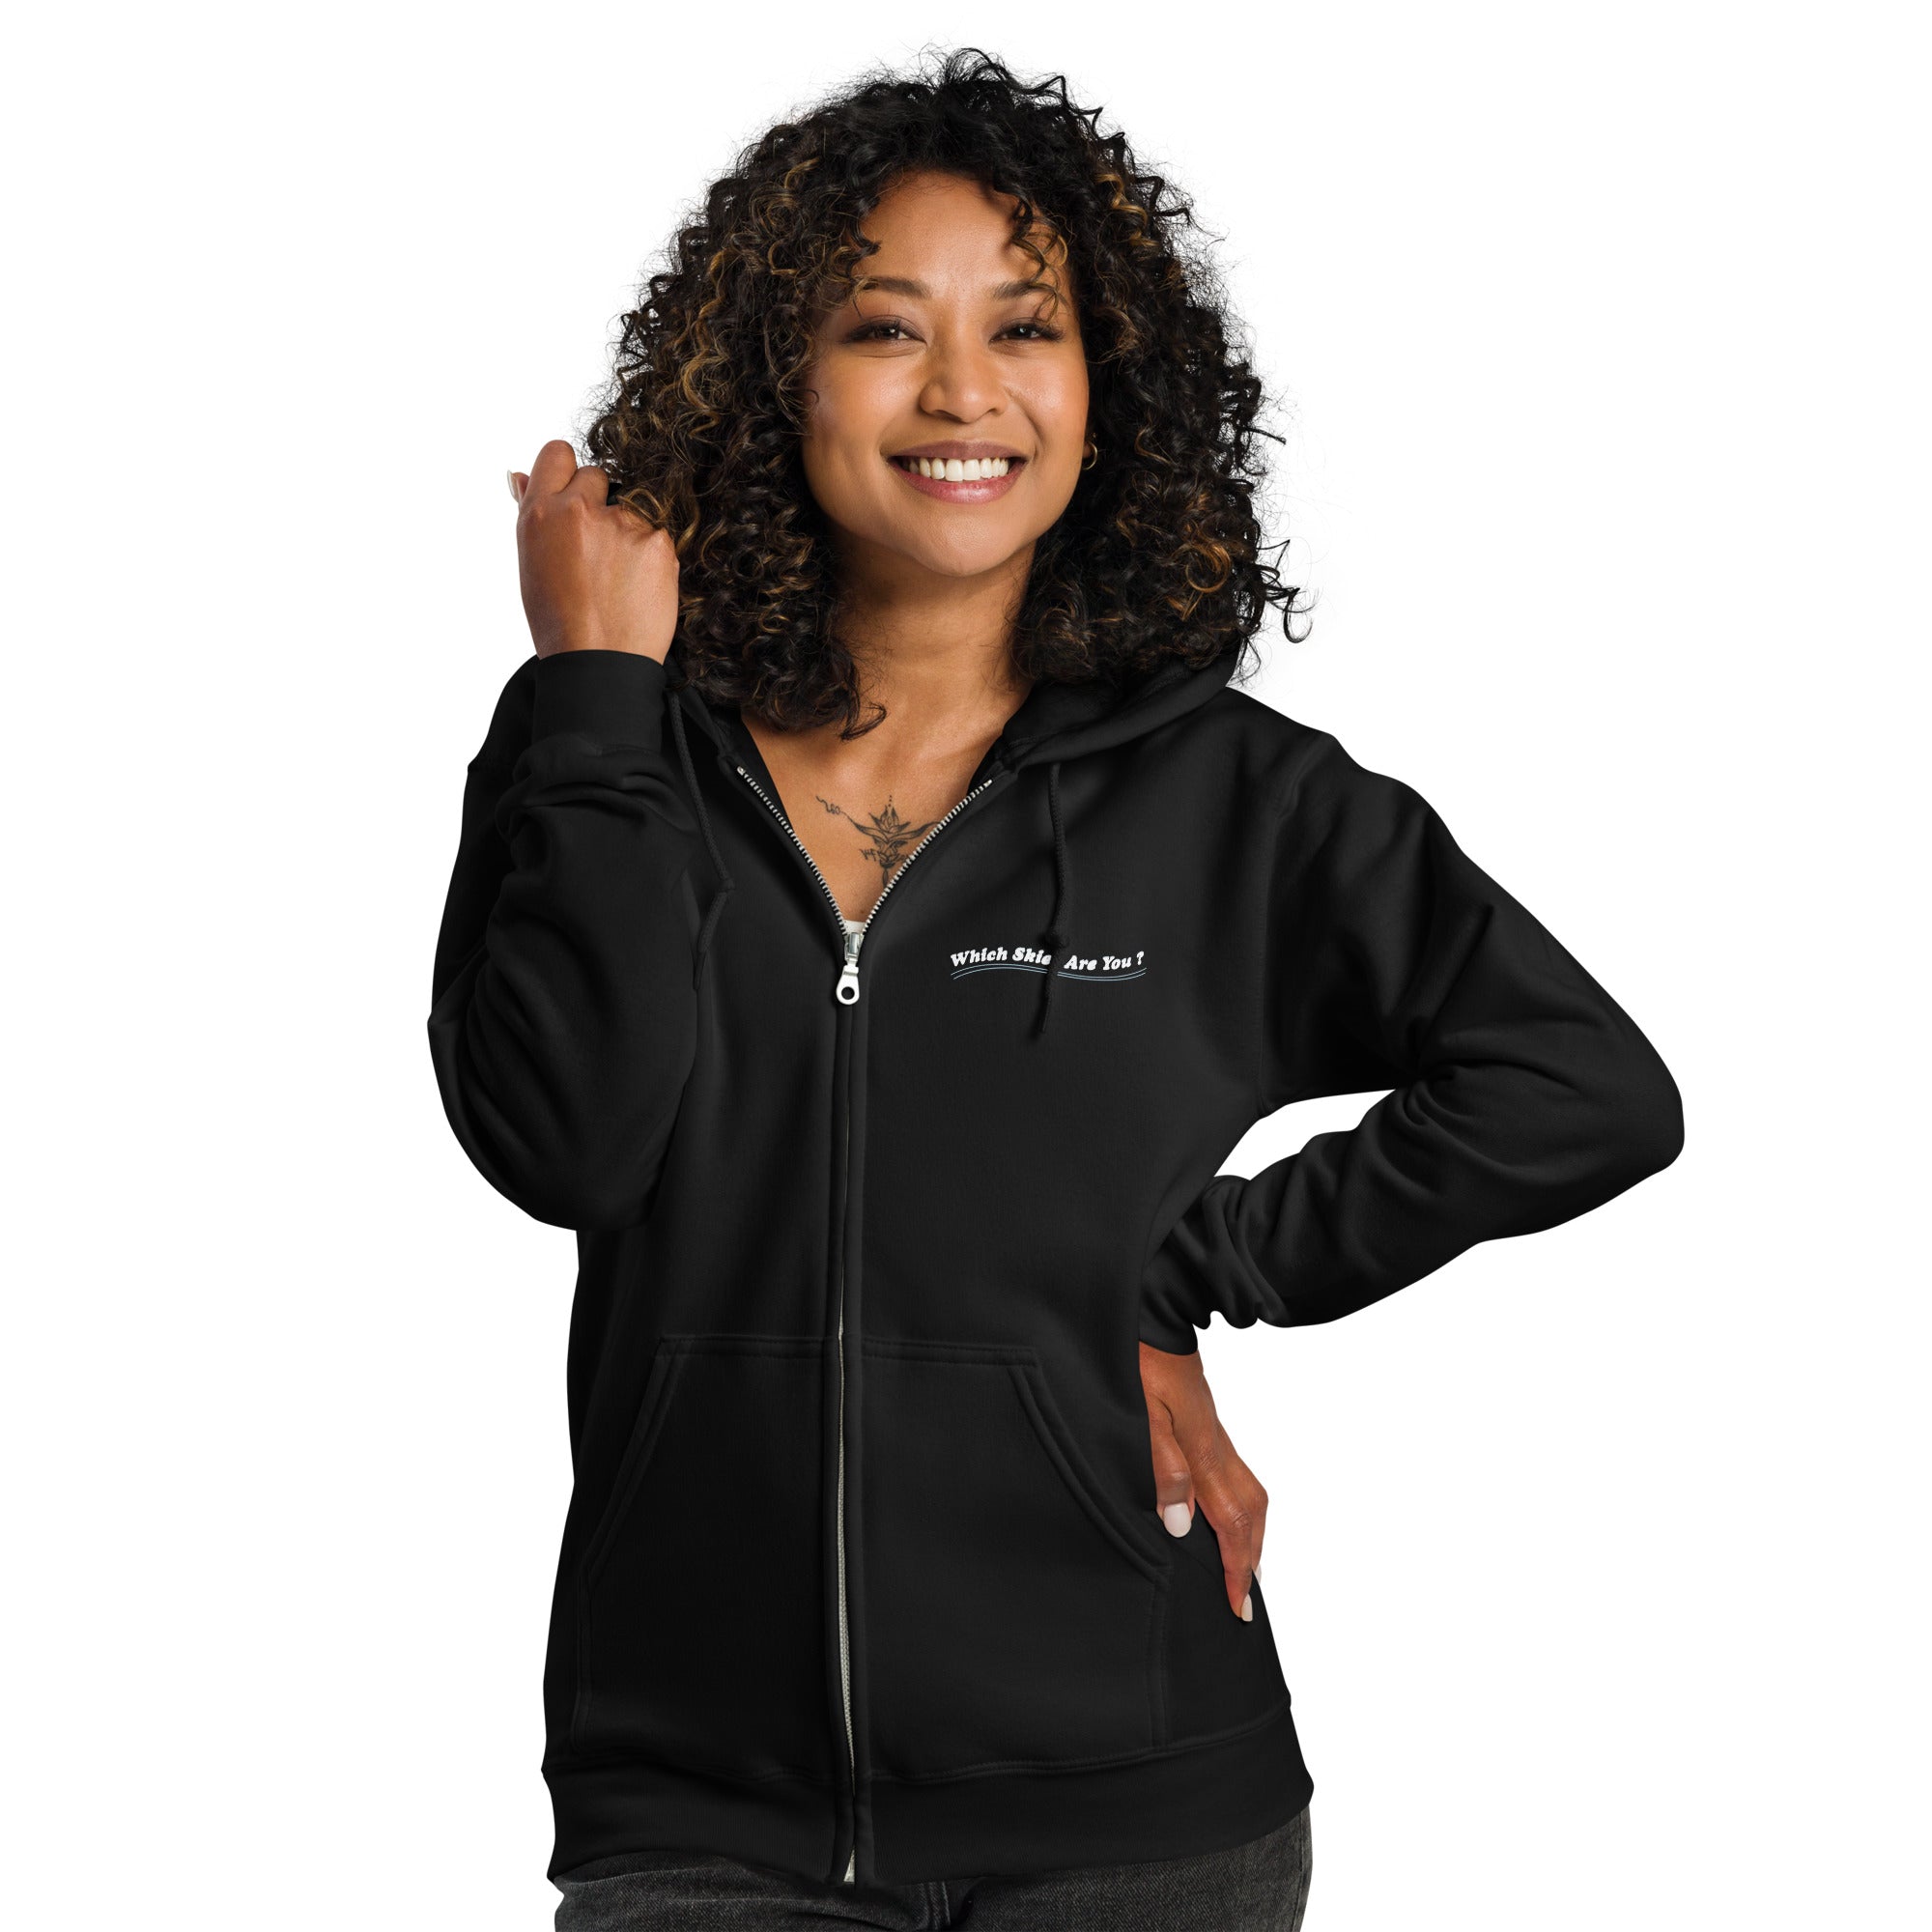 Unisex heavy blend zip hoodie Which skier are you? Love Instructor First Lesson free on dark colors (front & back)